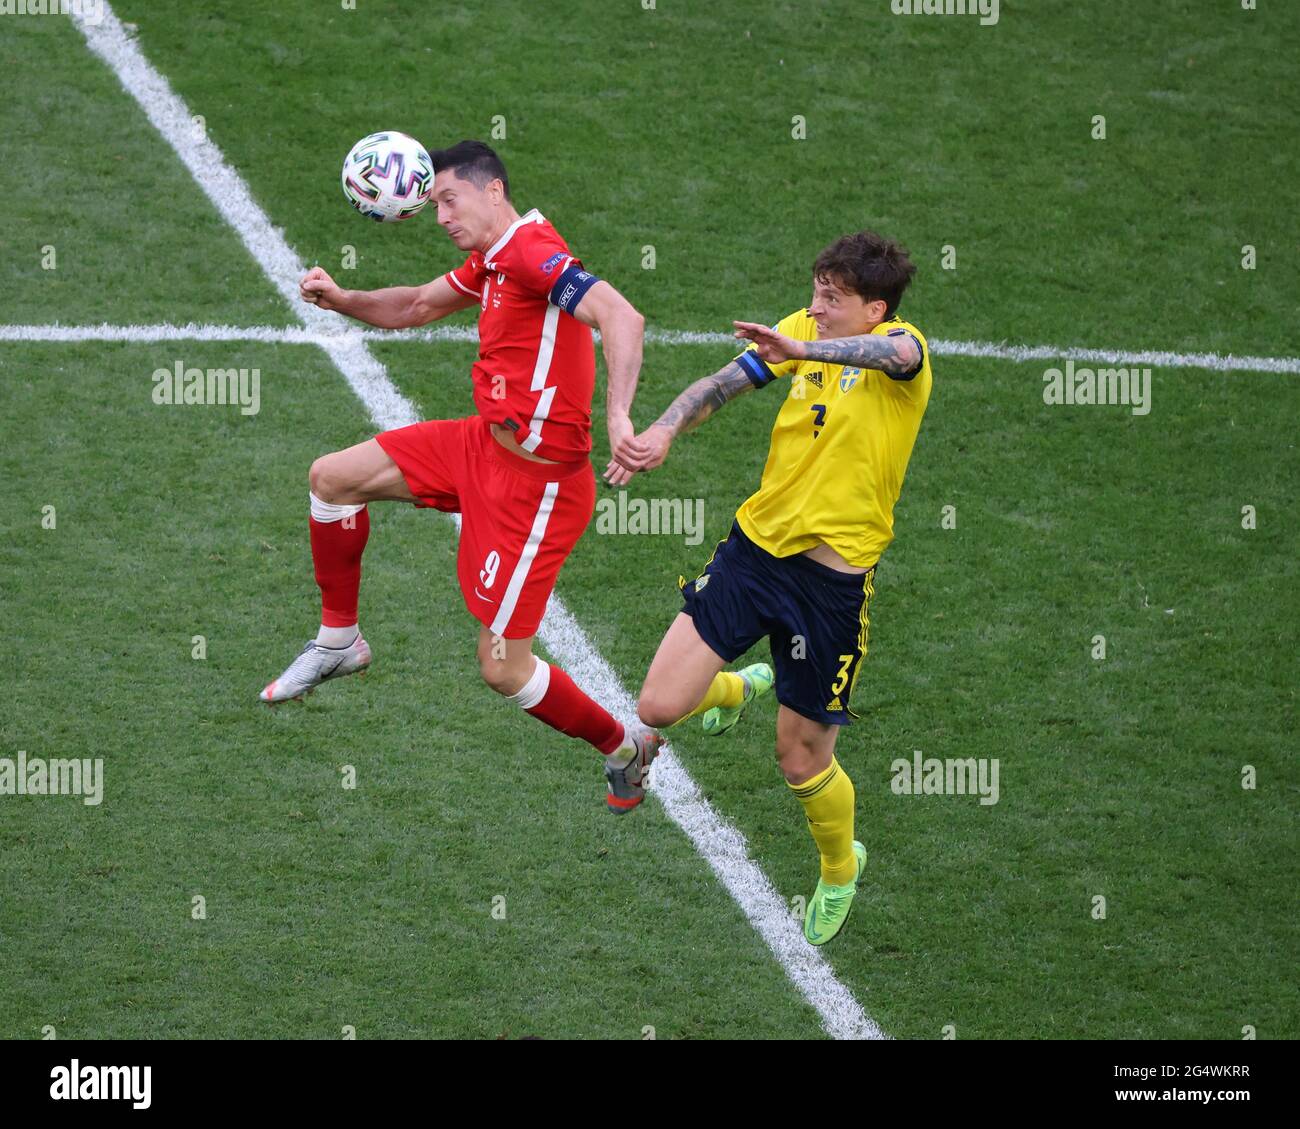 Saint Petersburg, Russia. 23rd June, 2021. Robert Lewandowski (9) of Poland and Victor Lindelof (3) of Sweden are seen in action during the European championship EURO 2020 between Poland and Sweden at Gazprom Arena. (Final Score; Poland 2:3 Sweden). Credit: SOPA Images Limited/Alamy Live News Stock Photo